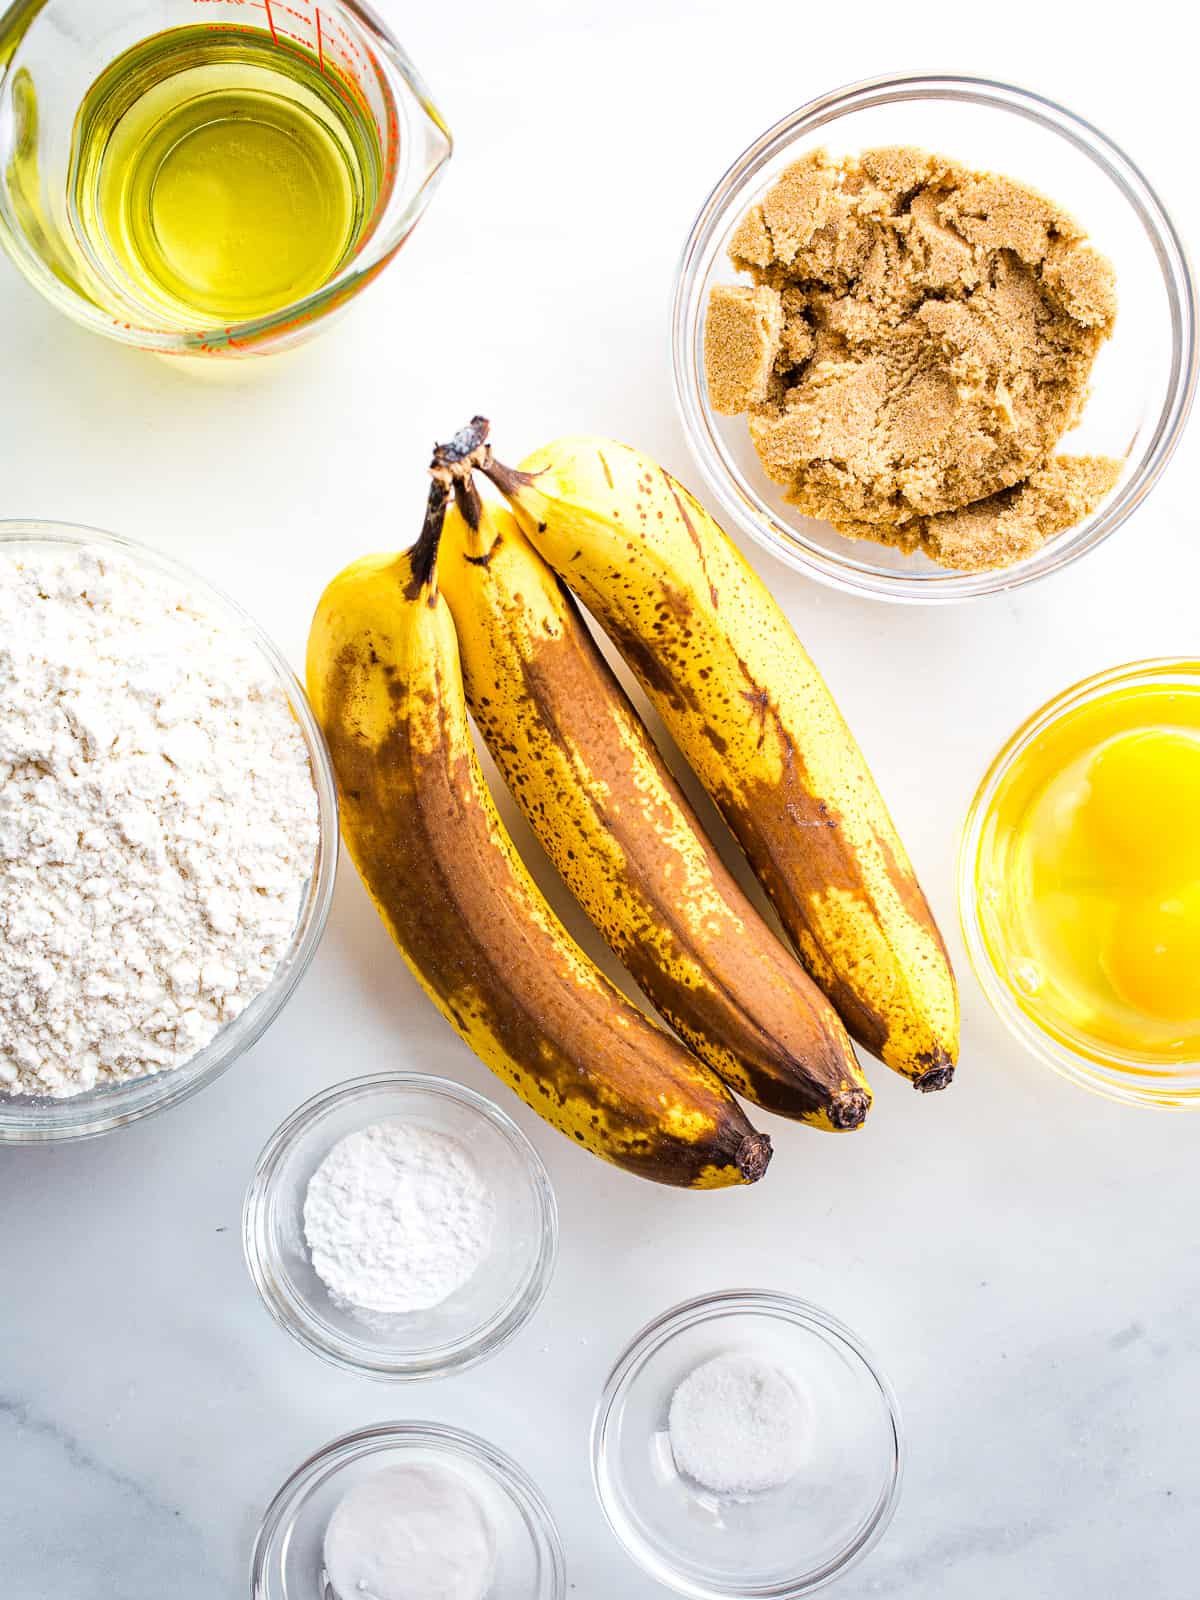 Gluten-free banana muffin recipe ingredients on a counter.